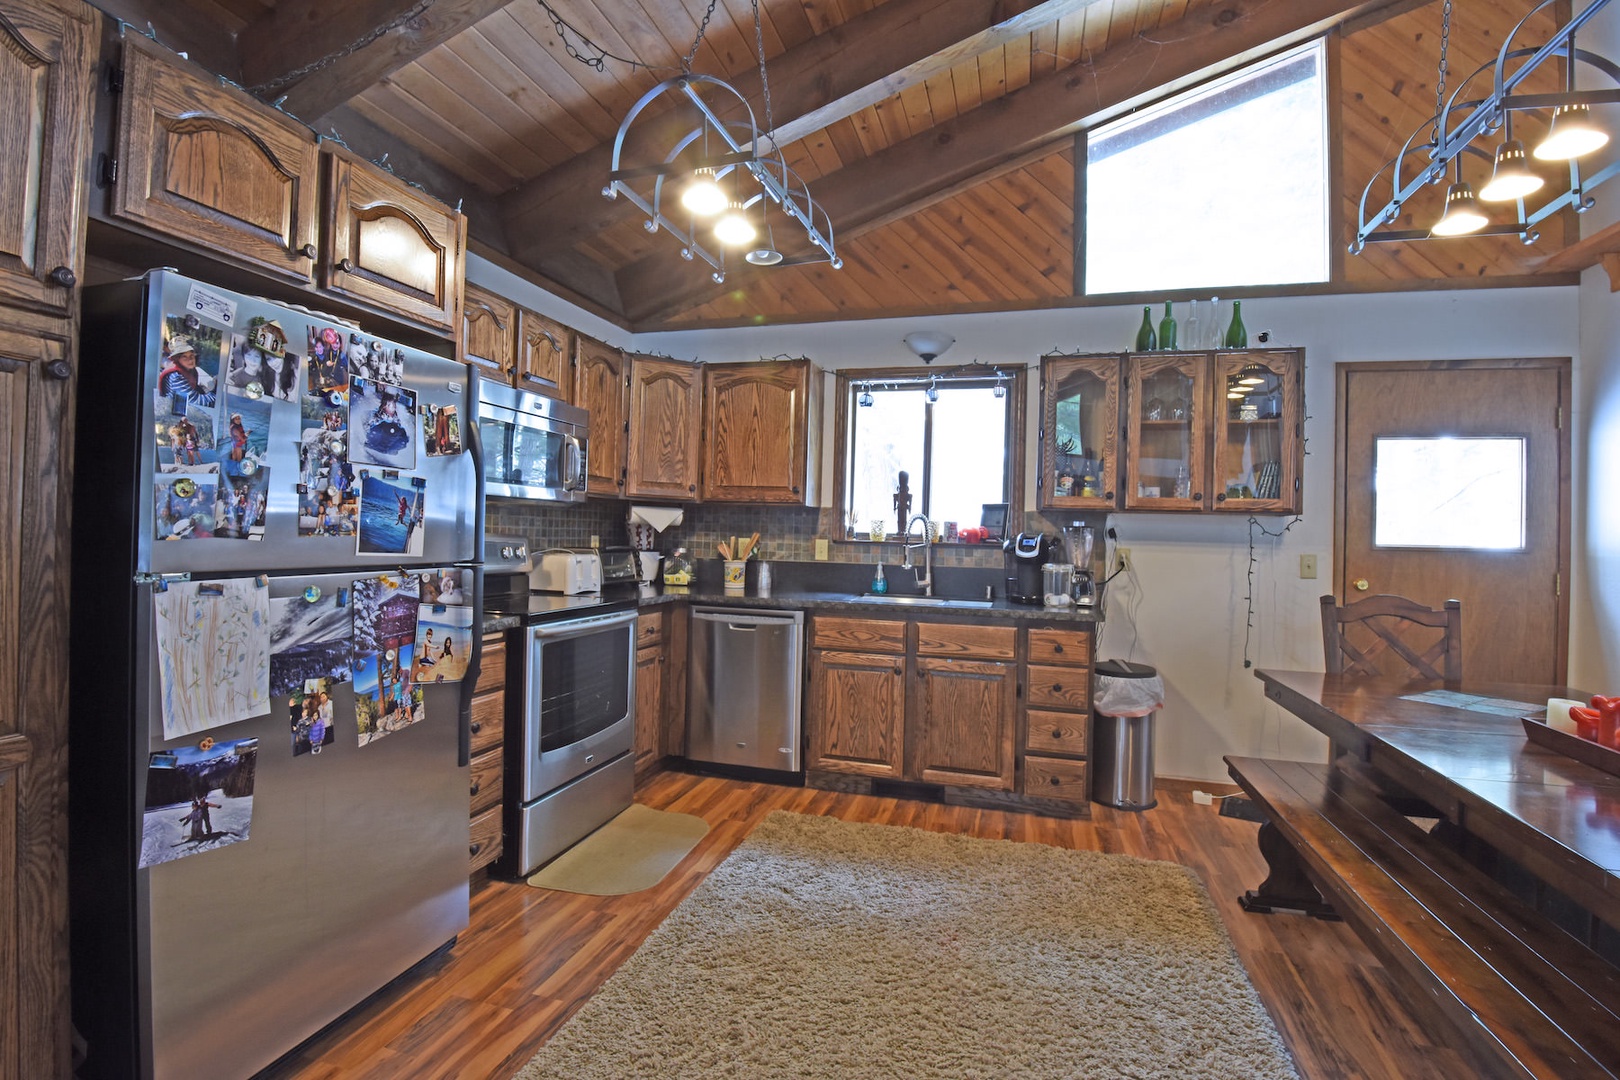 Full kitchen w/ toaster oven, slow cooker, drip coffee pot, etc.